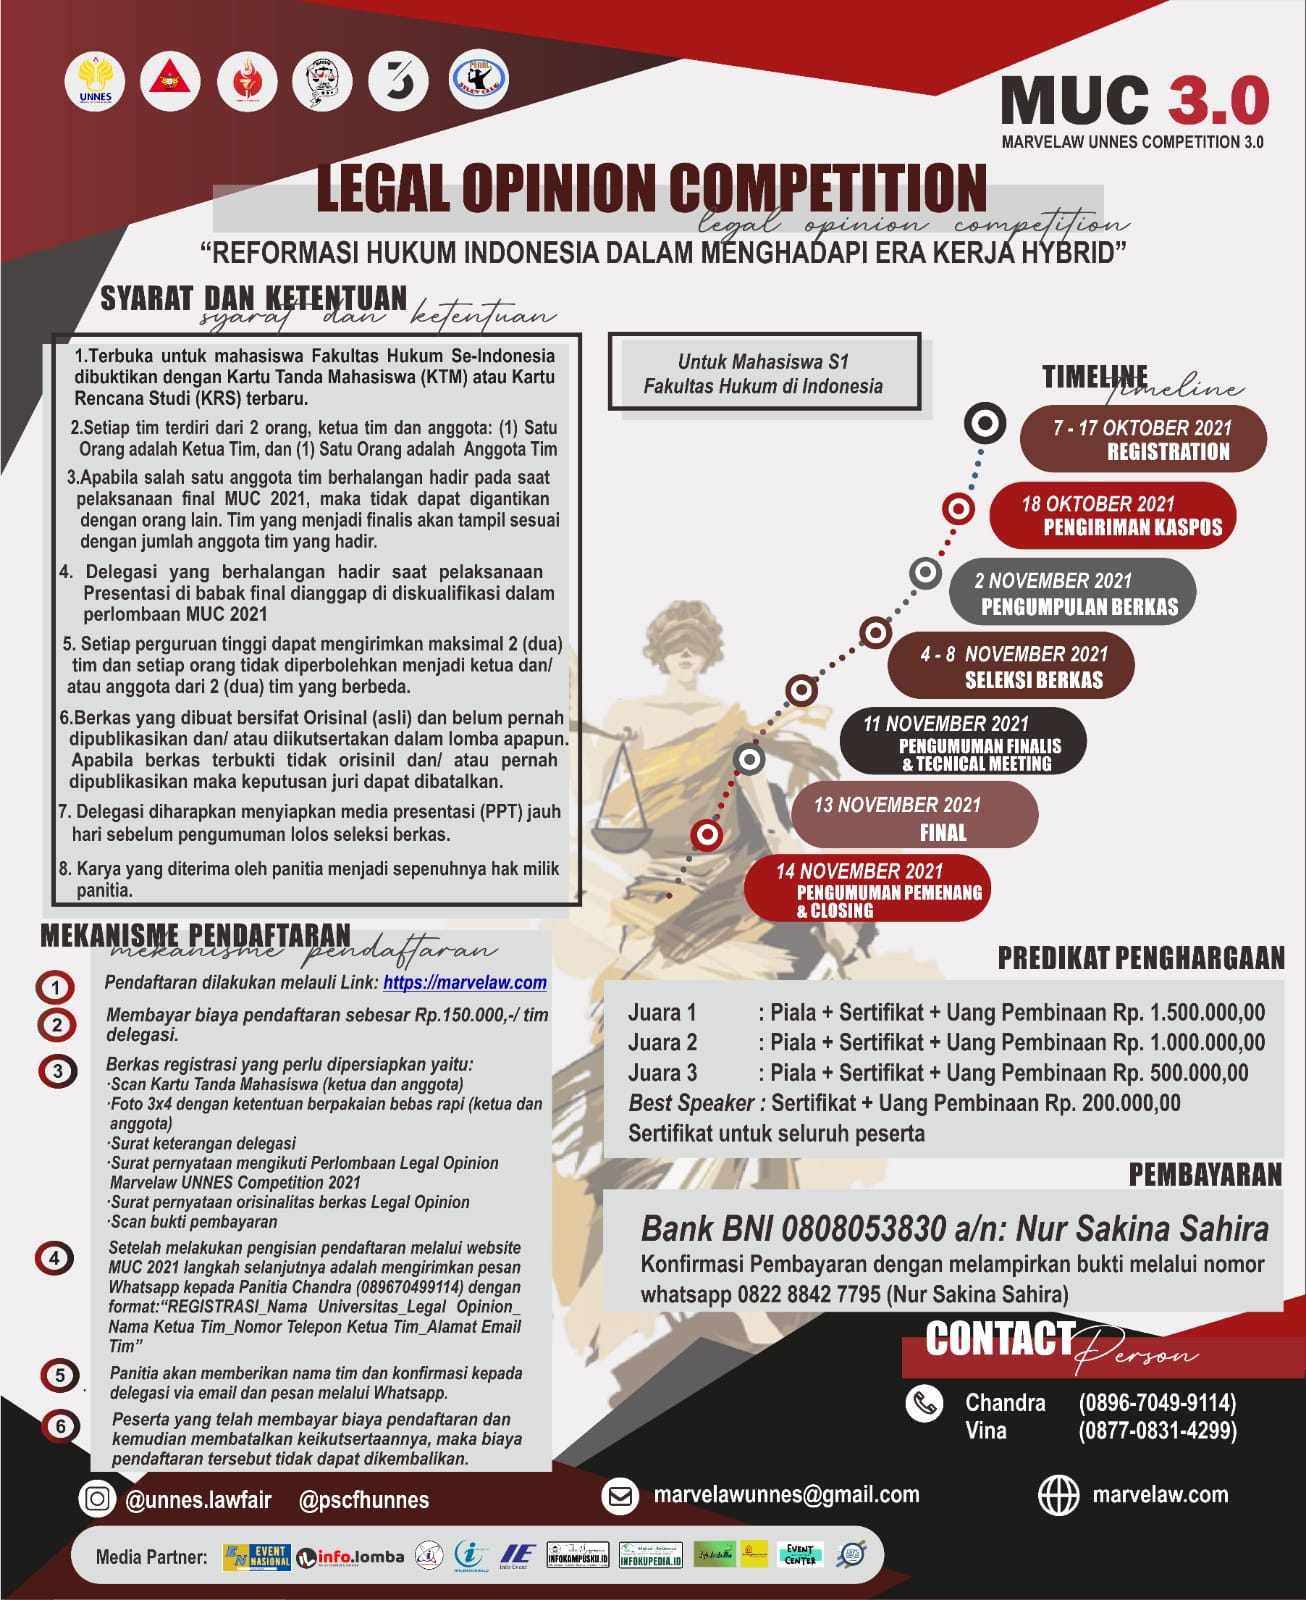 MARVELLAW UNNES COMPETITION 3.0